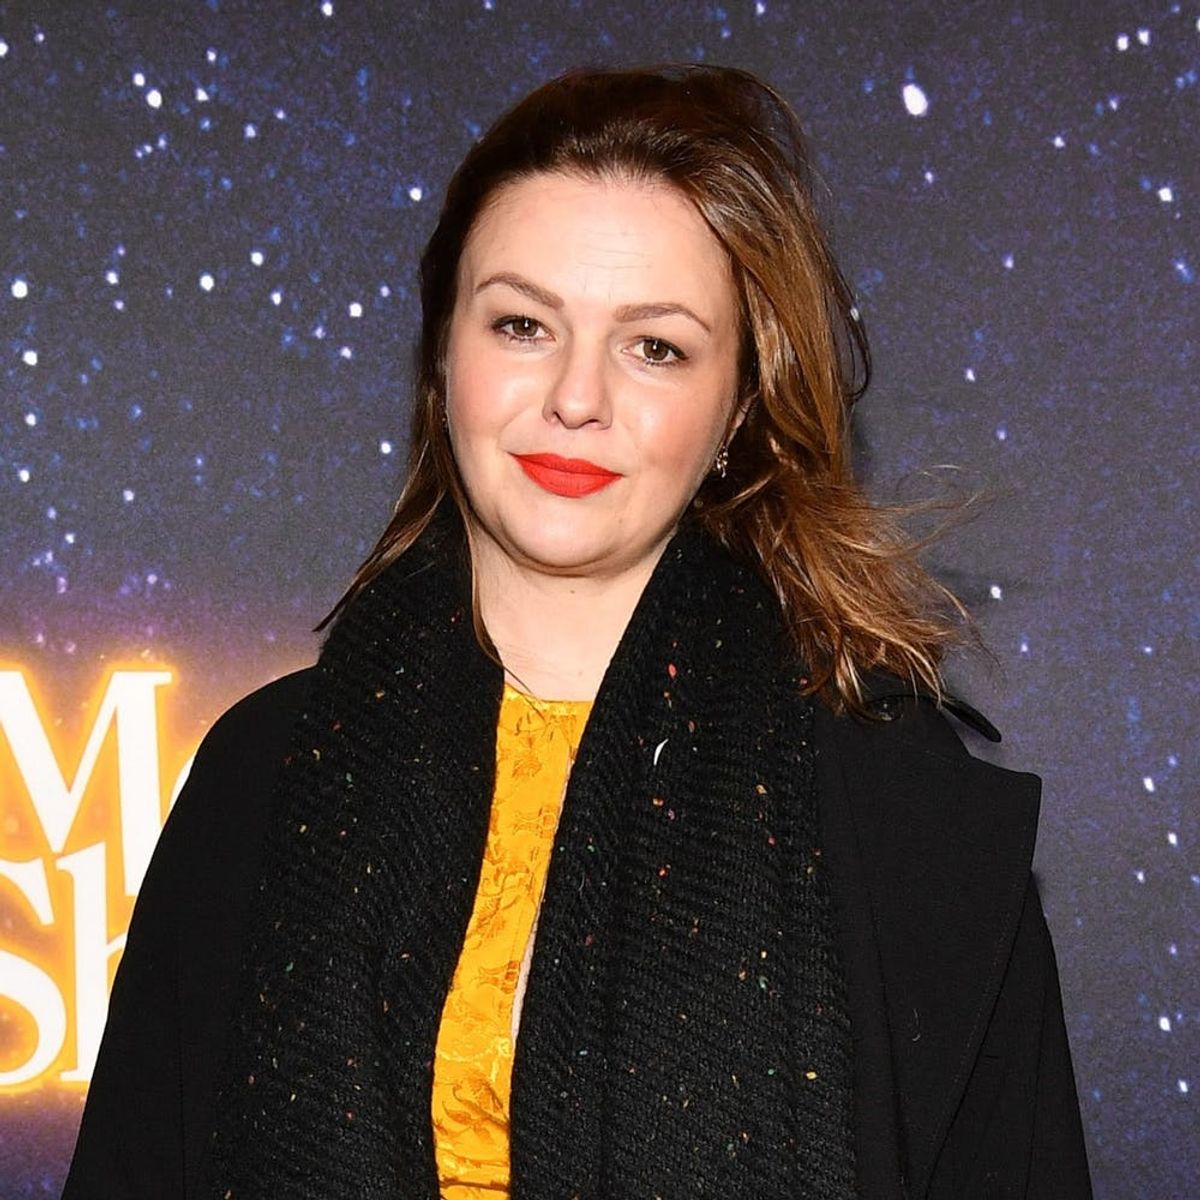 Amber Tamblyn Explains Why She’s ‘Not Ready’ for the Redemption of Men